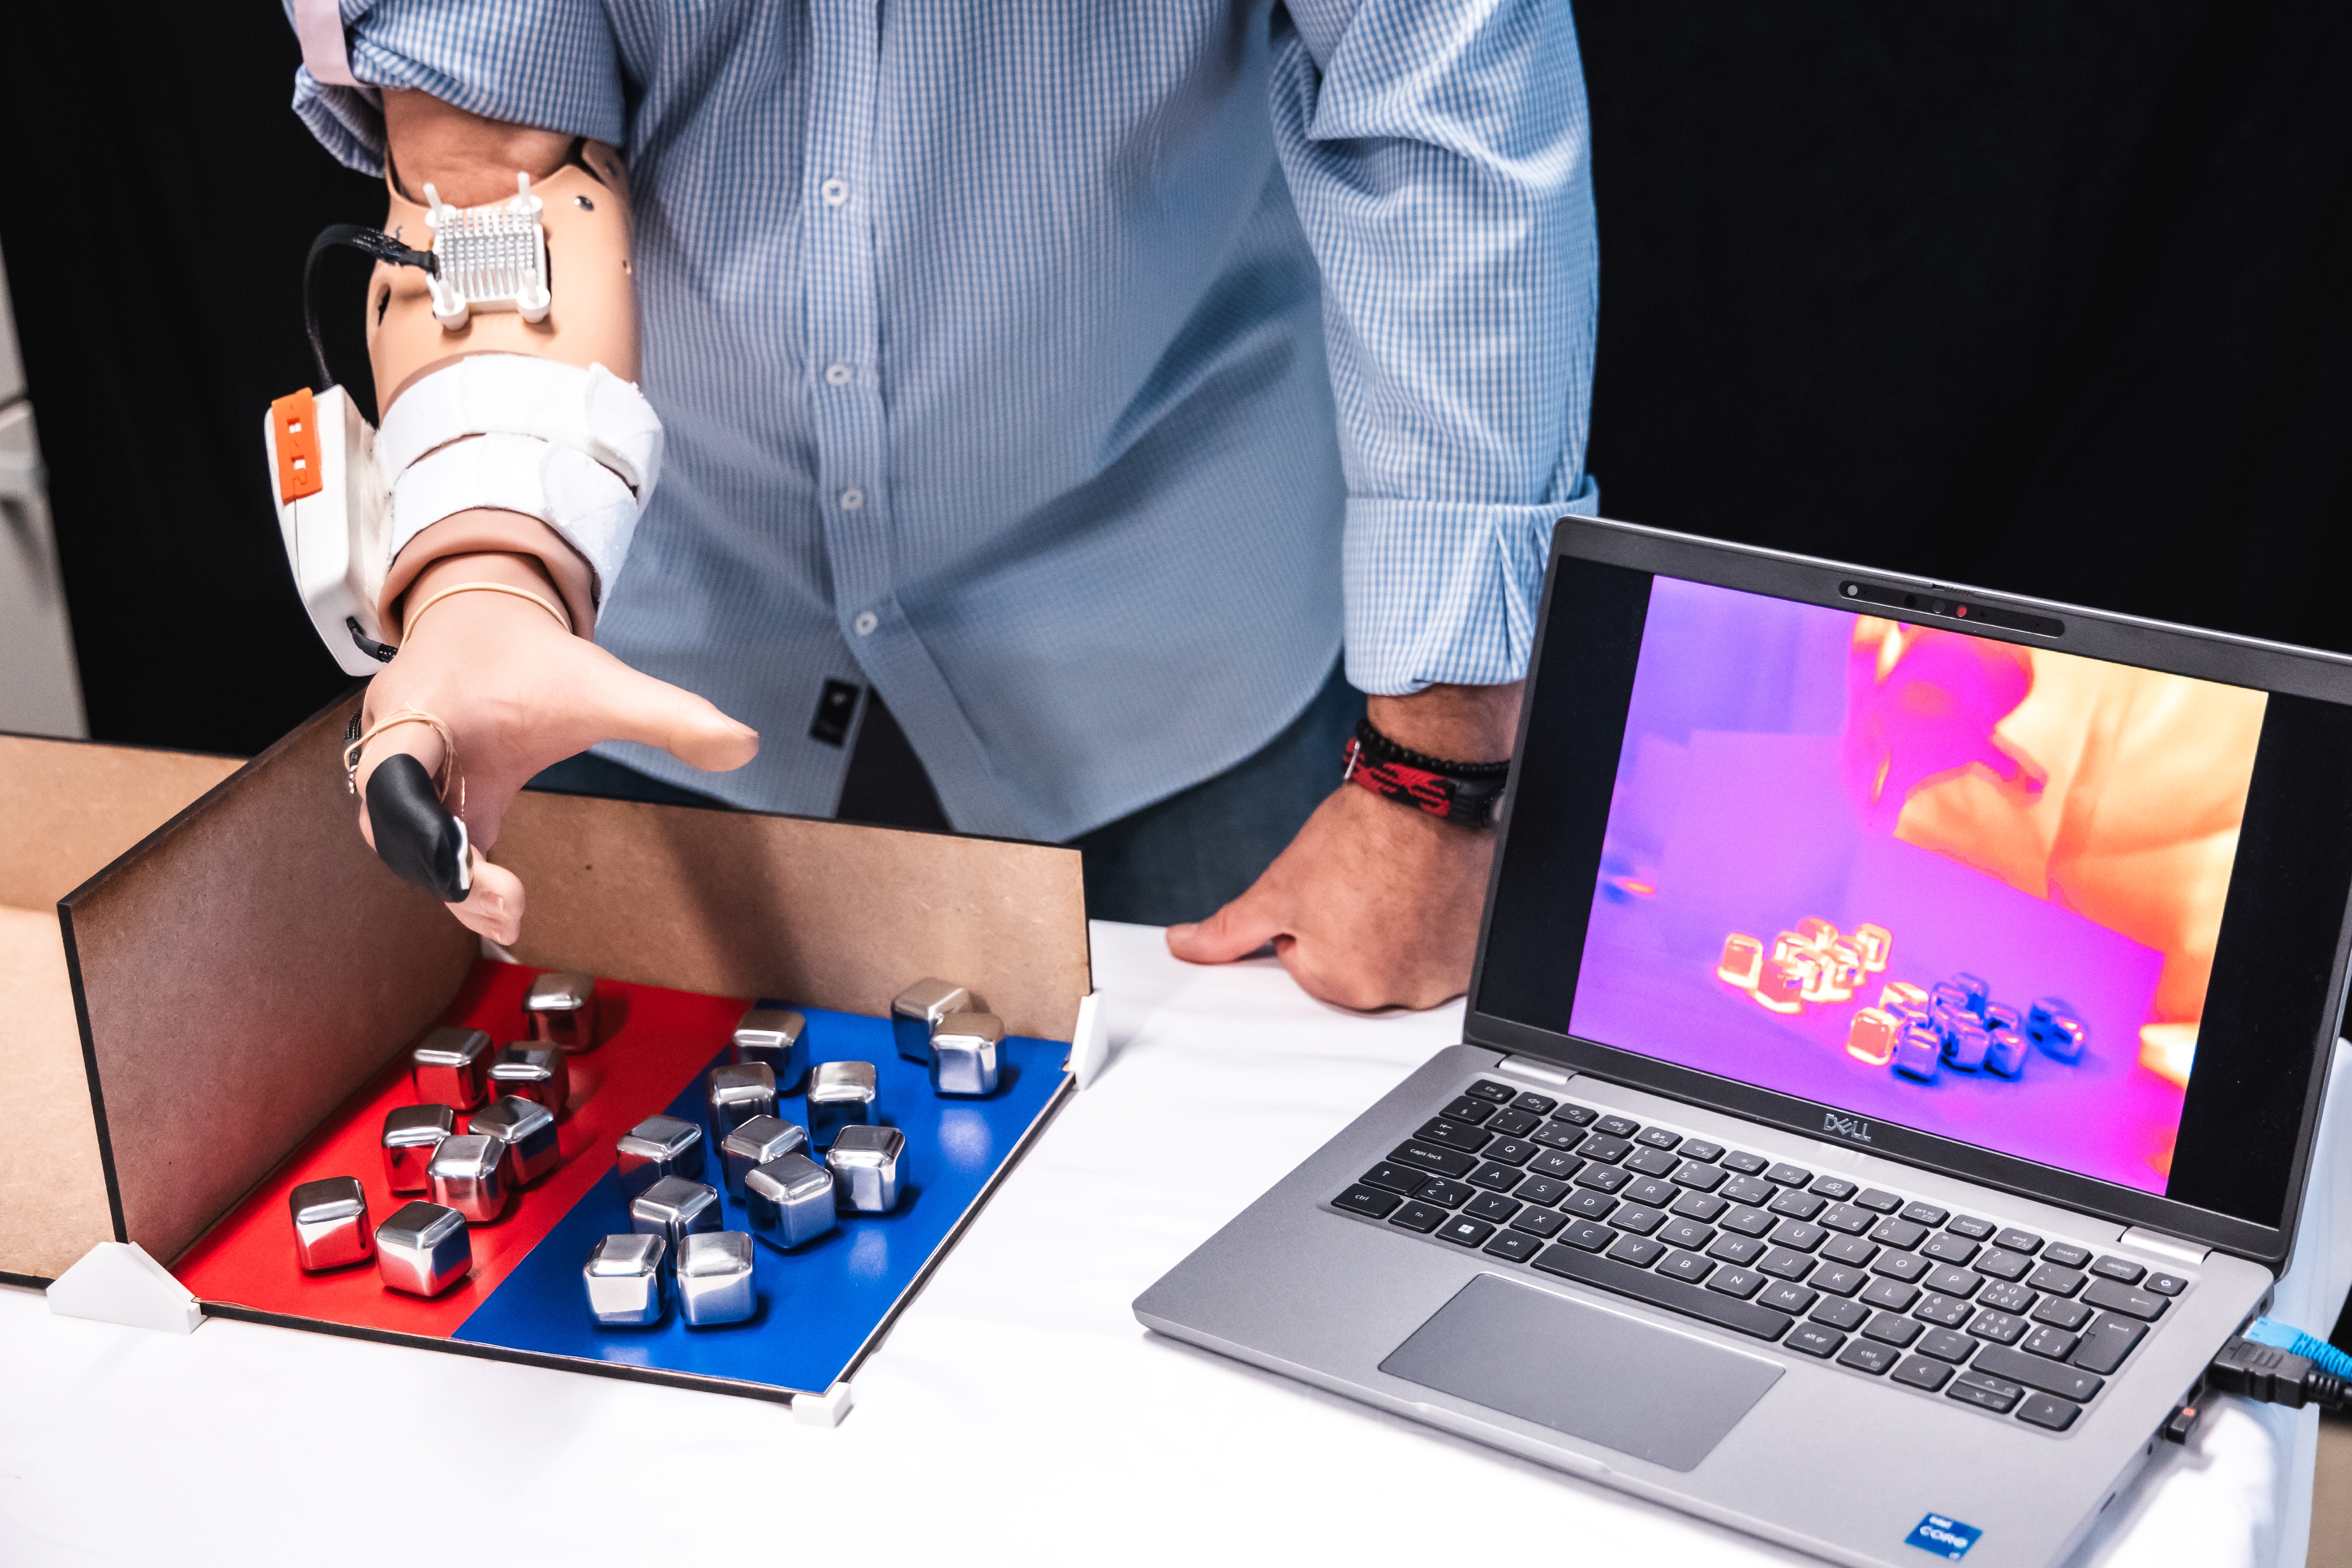 man with prosthetic arm sorting metal cubes into two piles, one on a red background and one on a blue background; laptop next to them on the table shows thermal imaging, with the red cubes hot and the blue cubes cold